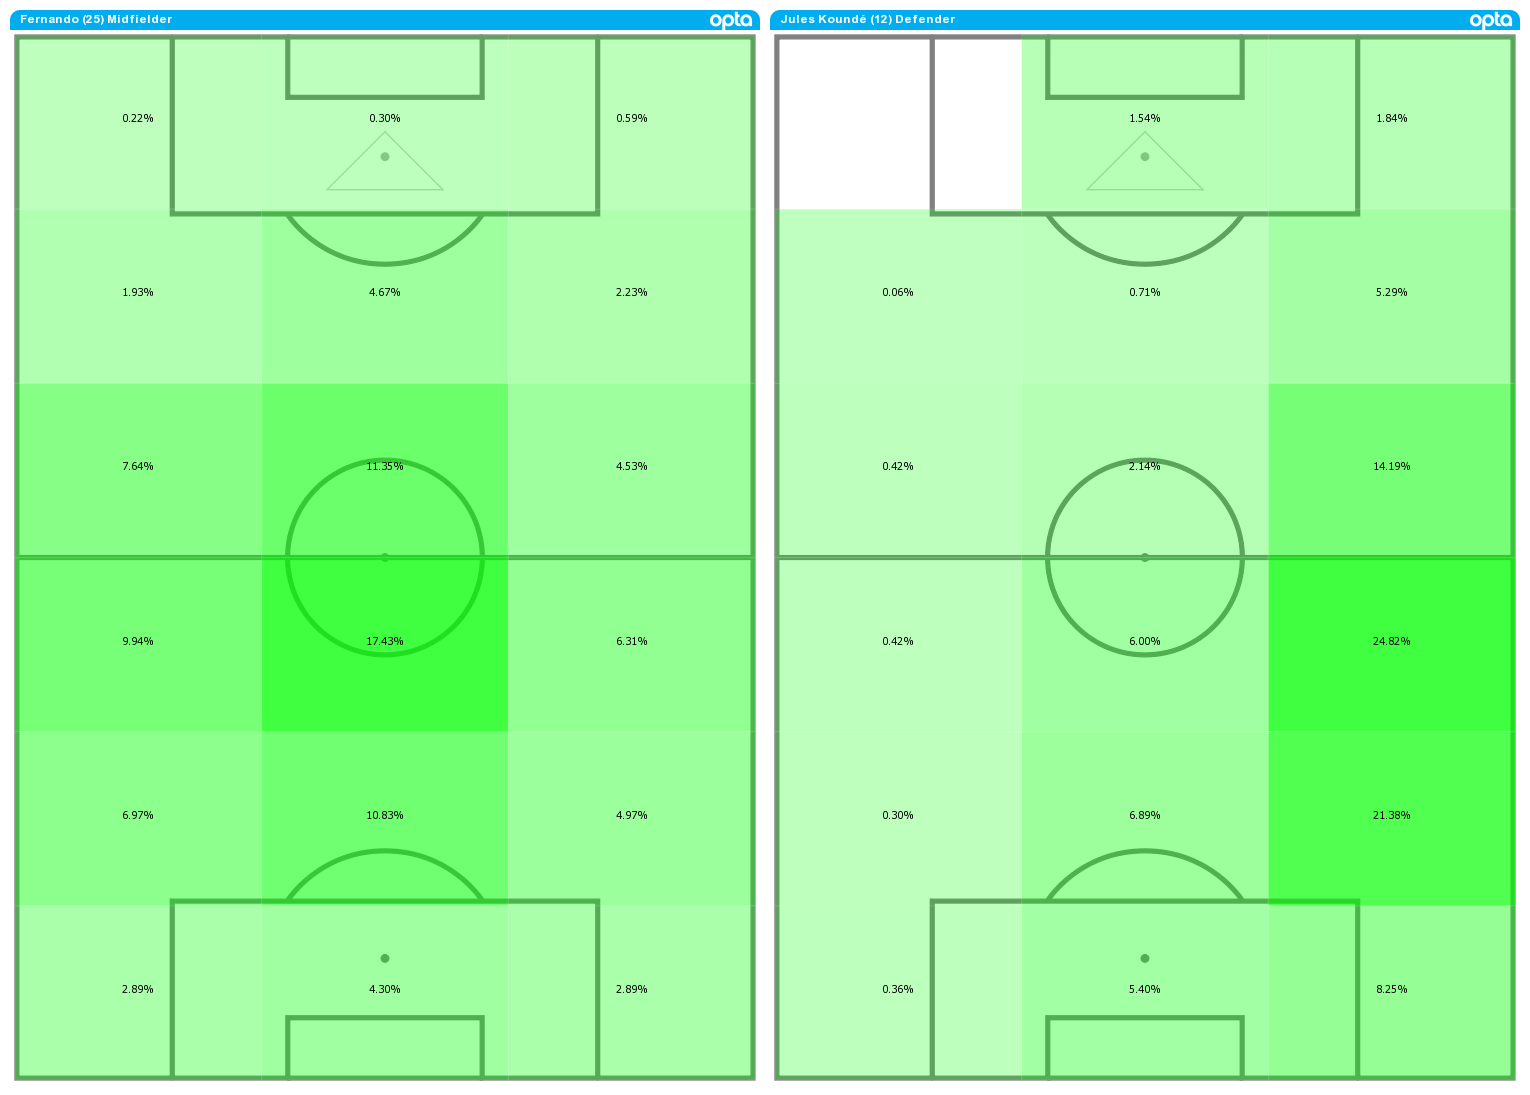 The average position activity maps of Fernando and Jules Kounde in LaLiga this season